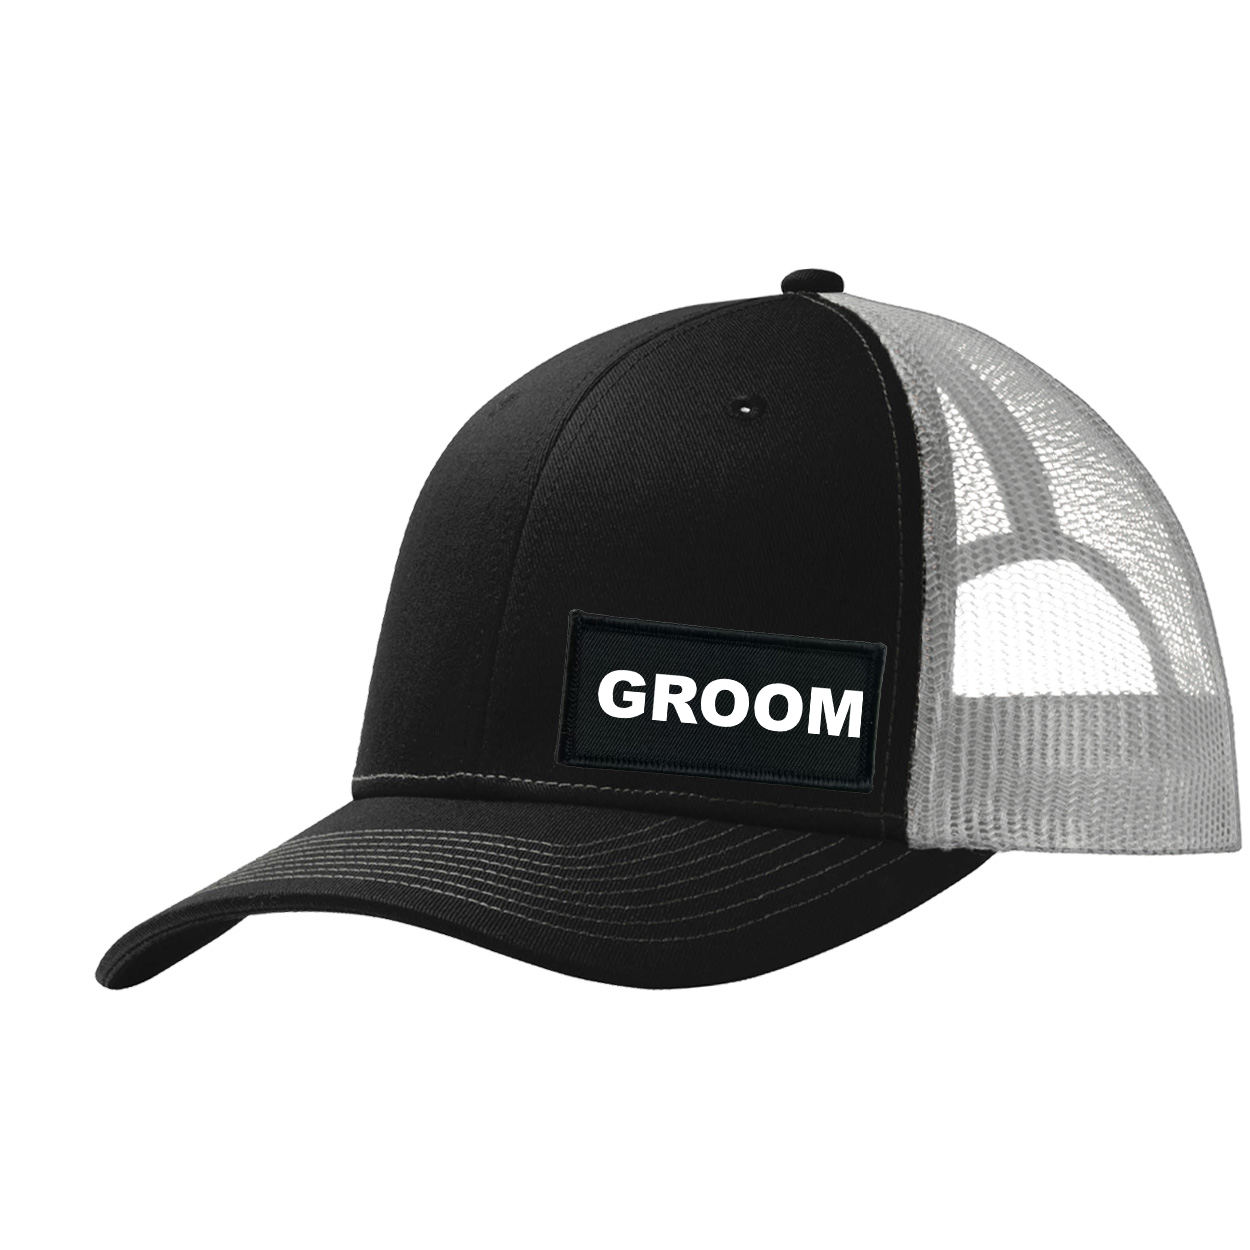 Groom Brand Logo Night Out Woven Patch Snapback Trucker Hat Black/Gray